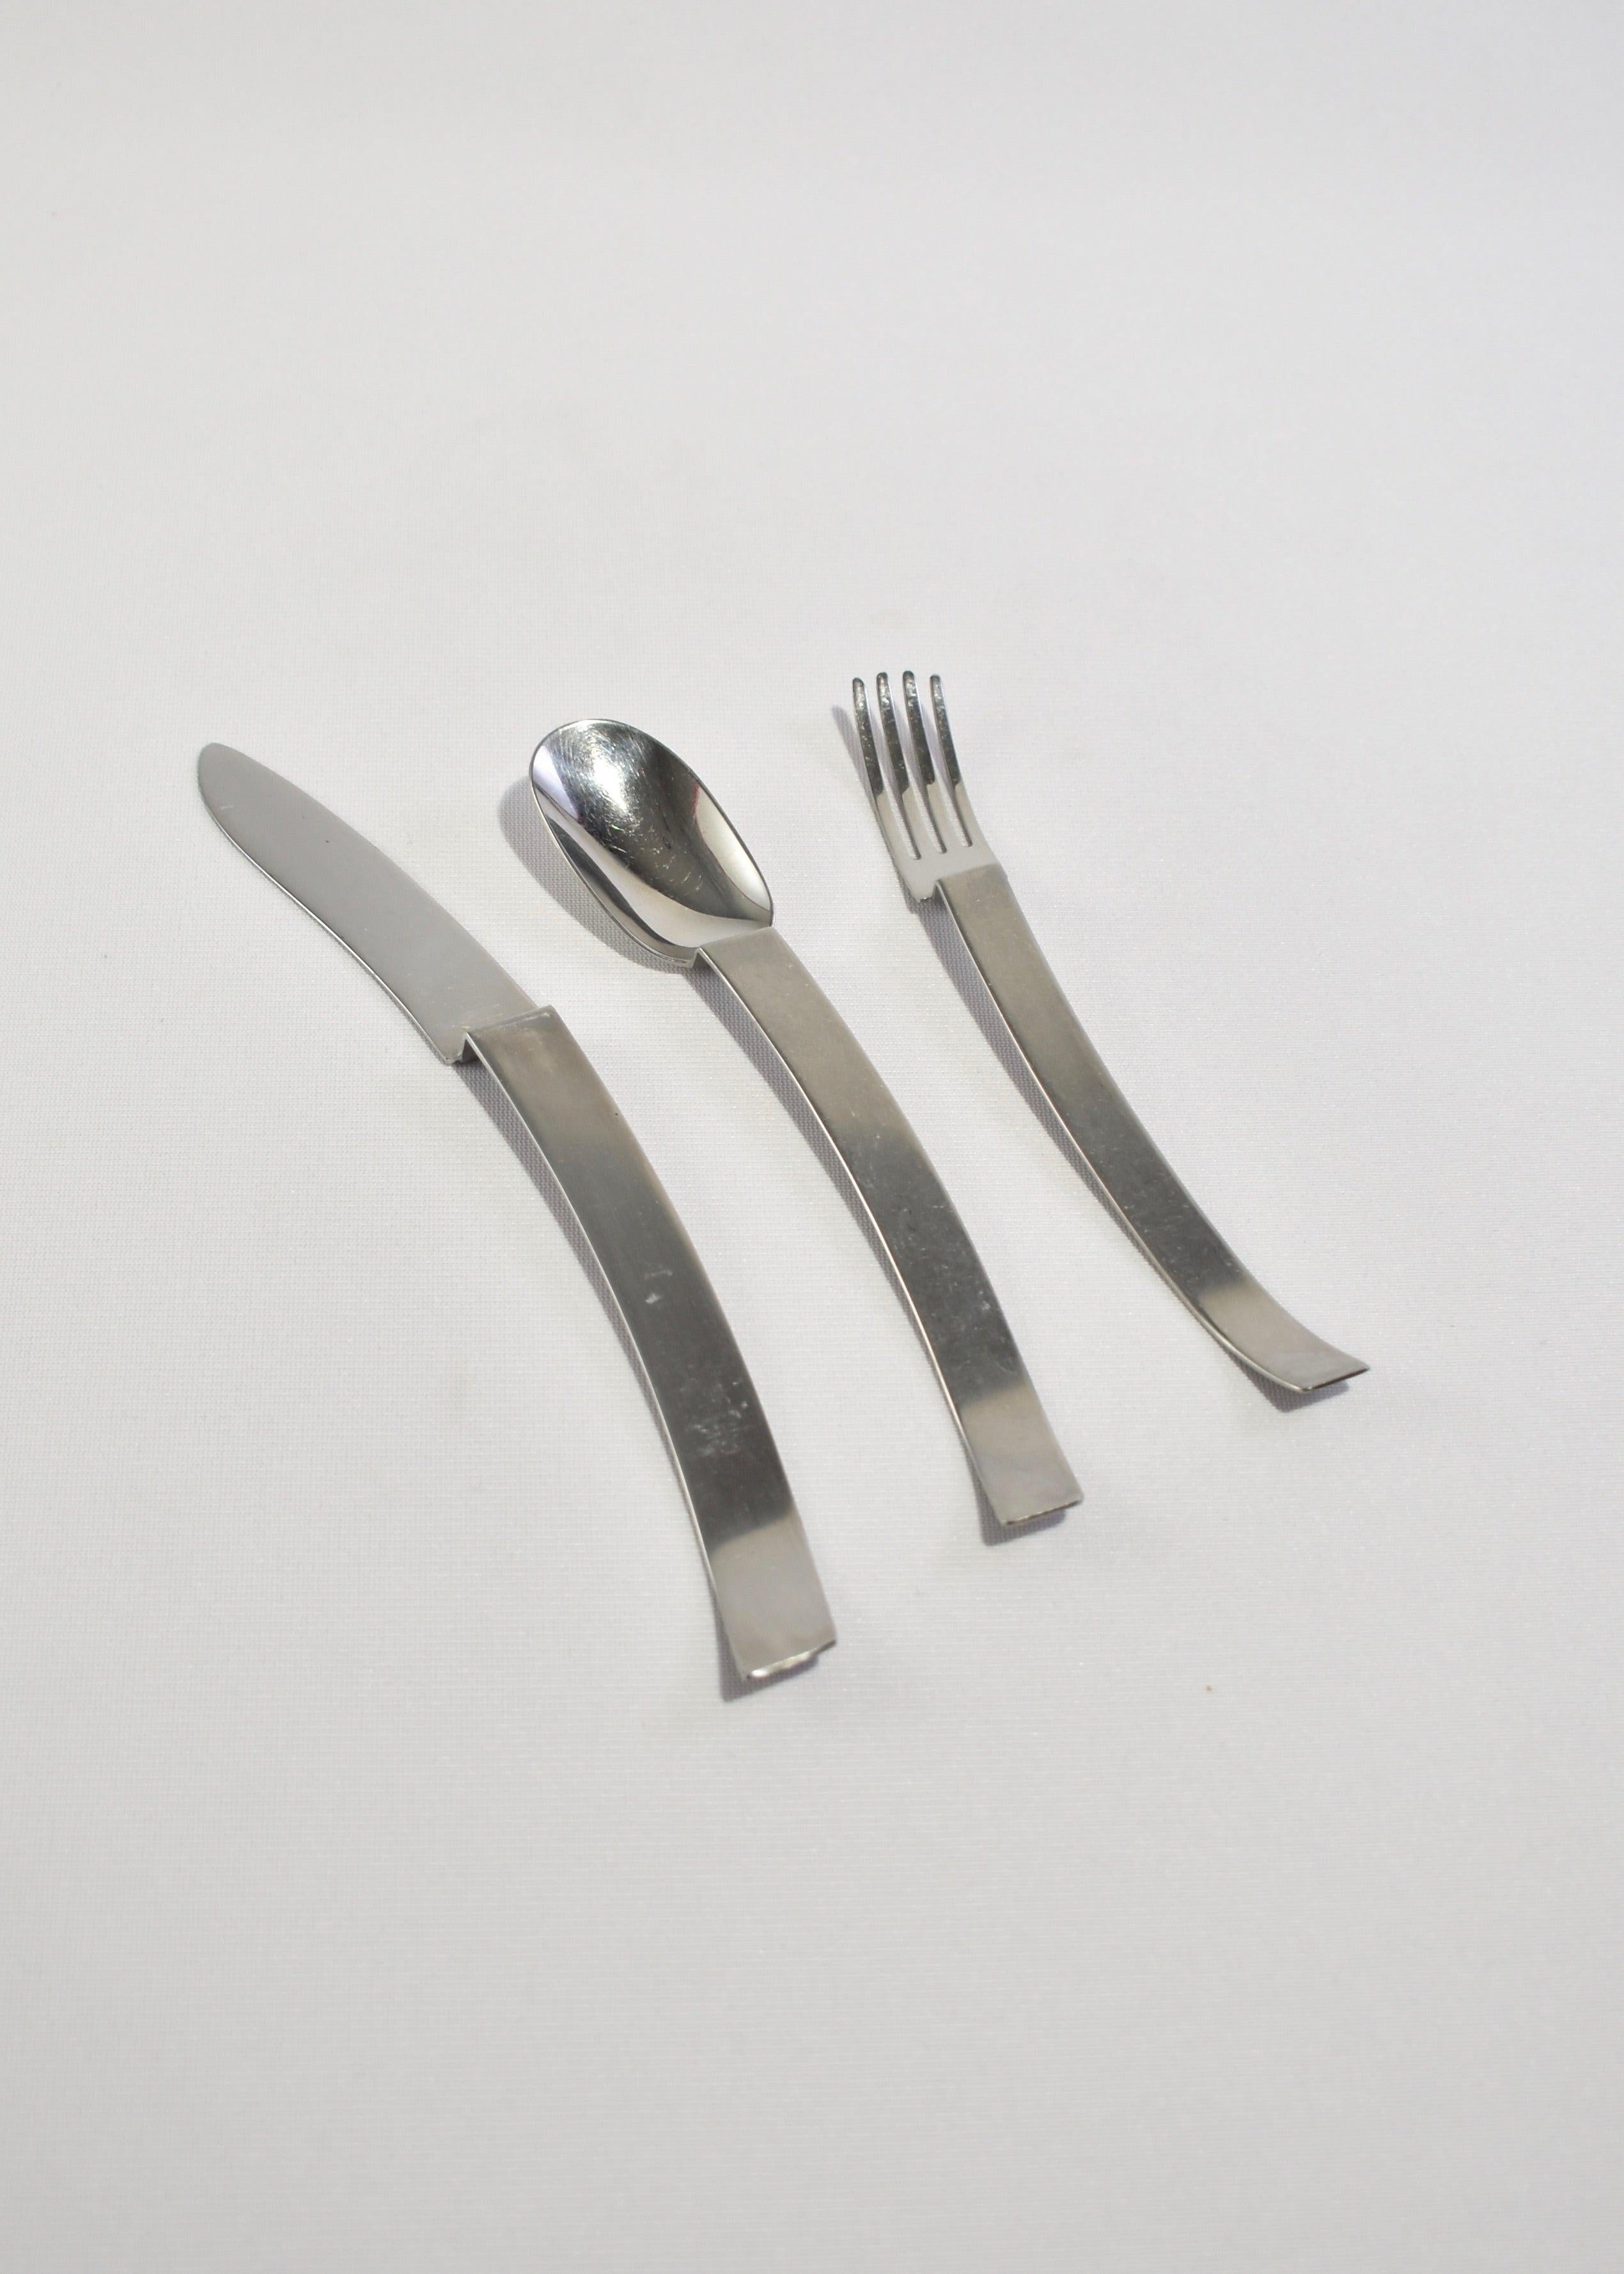 Rare, curved stainless steel flatware set of three by Kam Yamazaki. Crafted in Japan.

Purchase includes one set of three pieces.

Dimensions:
Knife: 9.5 in (24.13 cm) long
Spoon: 7.75 in (19.68 cm) long
Fork: 7.5 in (19.05 cm) long.